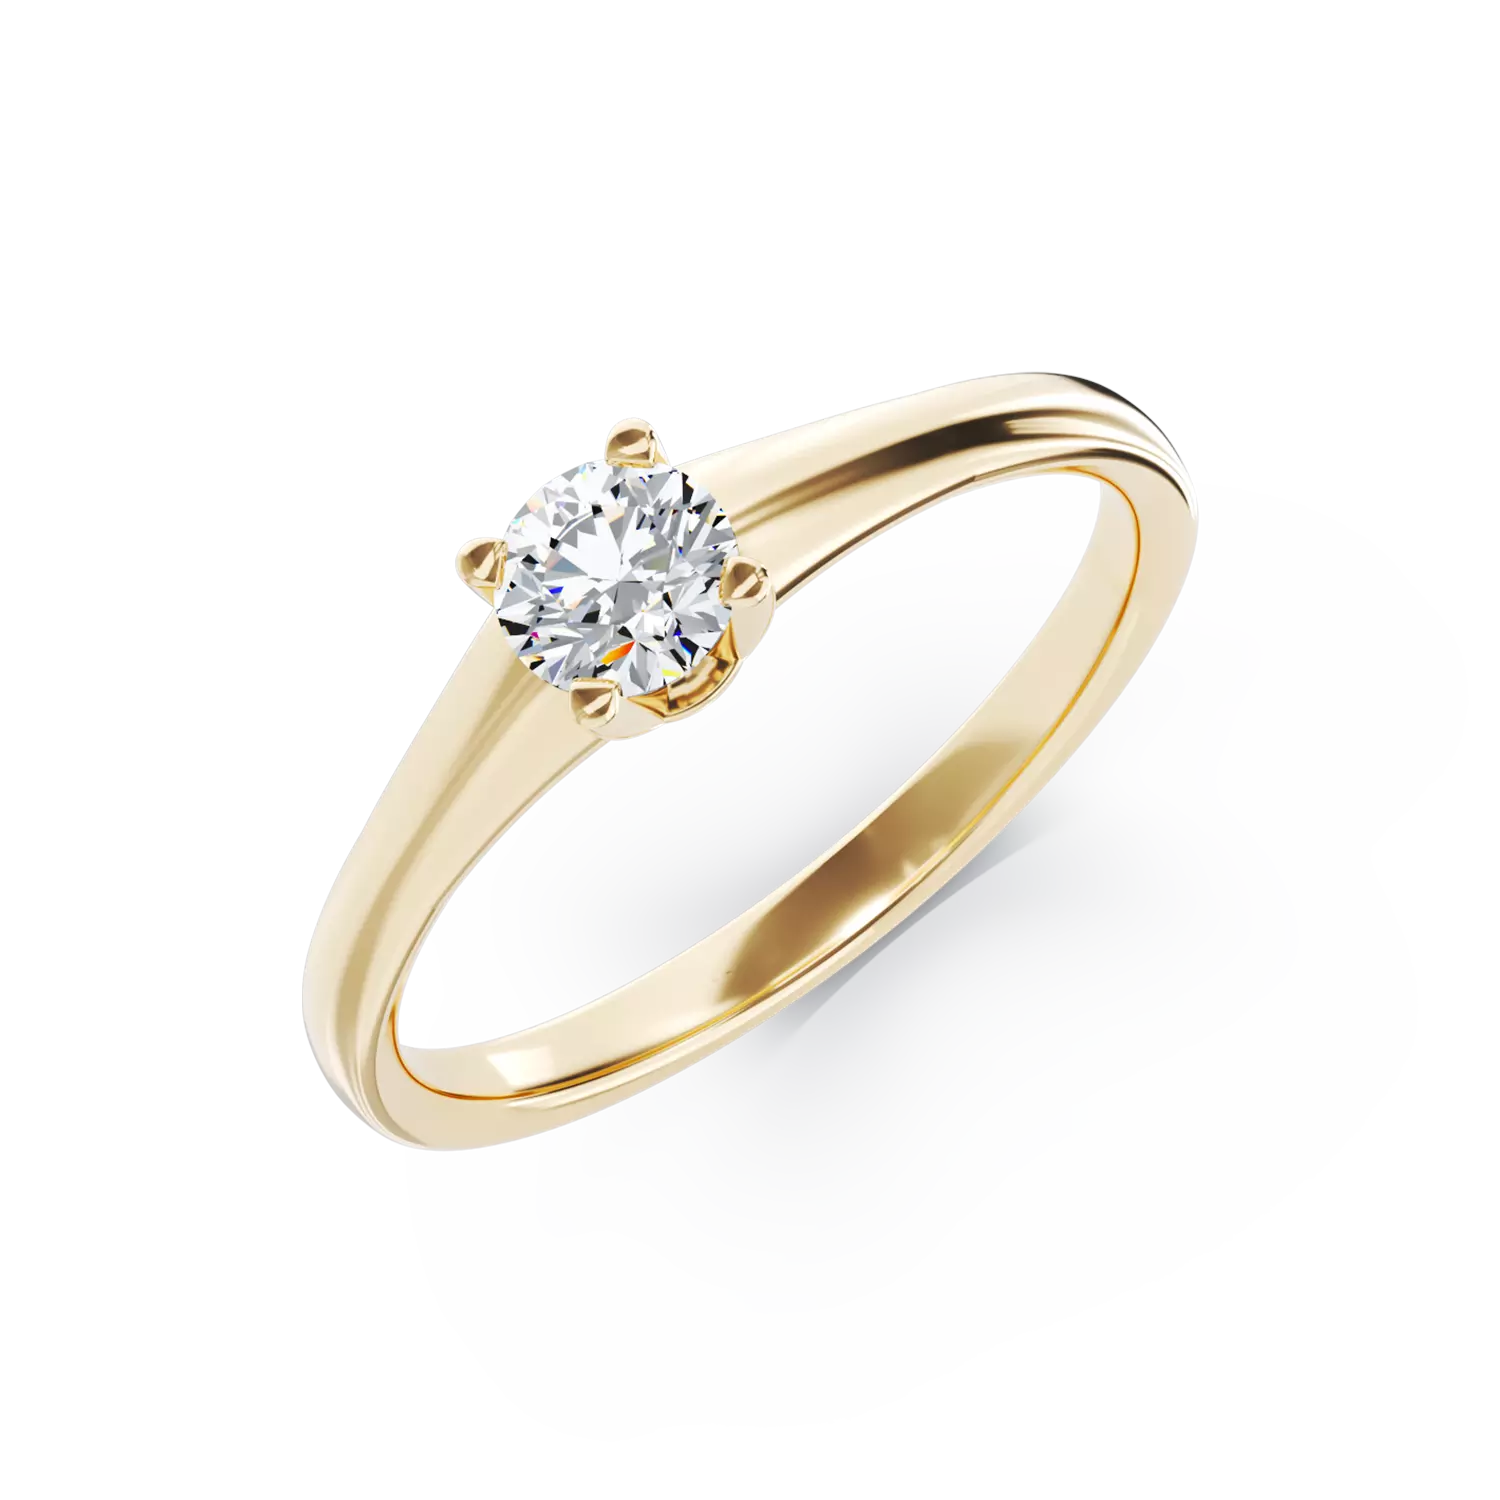 18K yellow gold engagement ring with a 0.31ct solitaire diamond